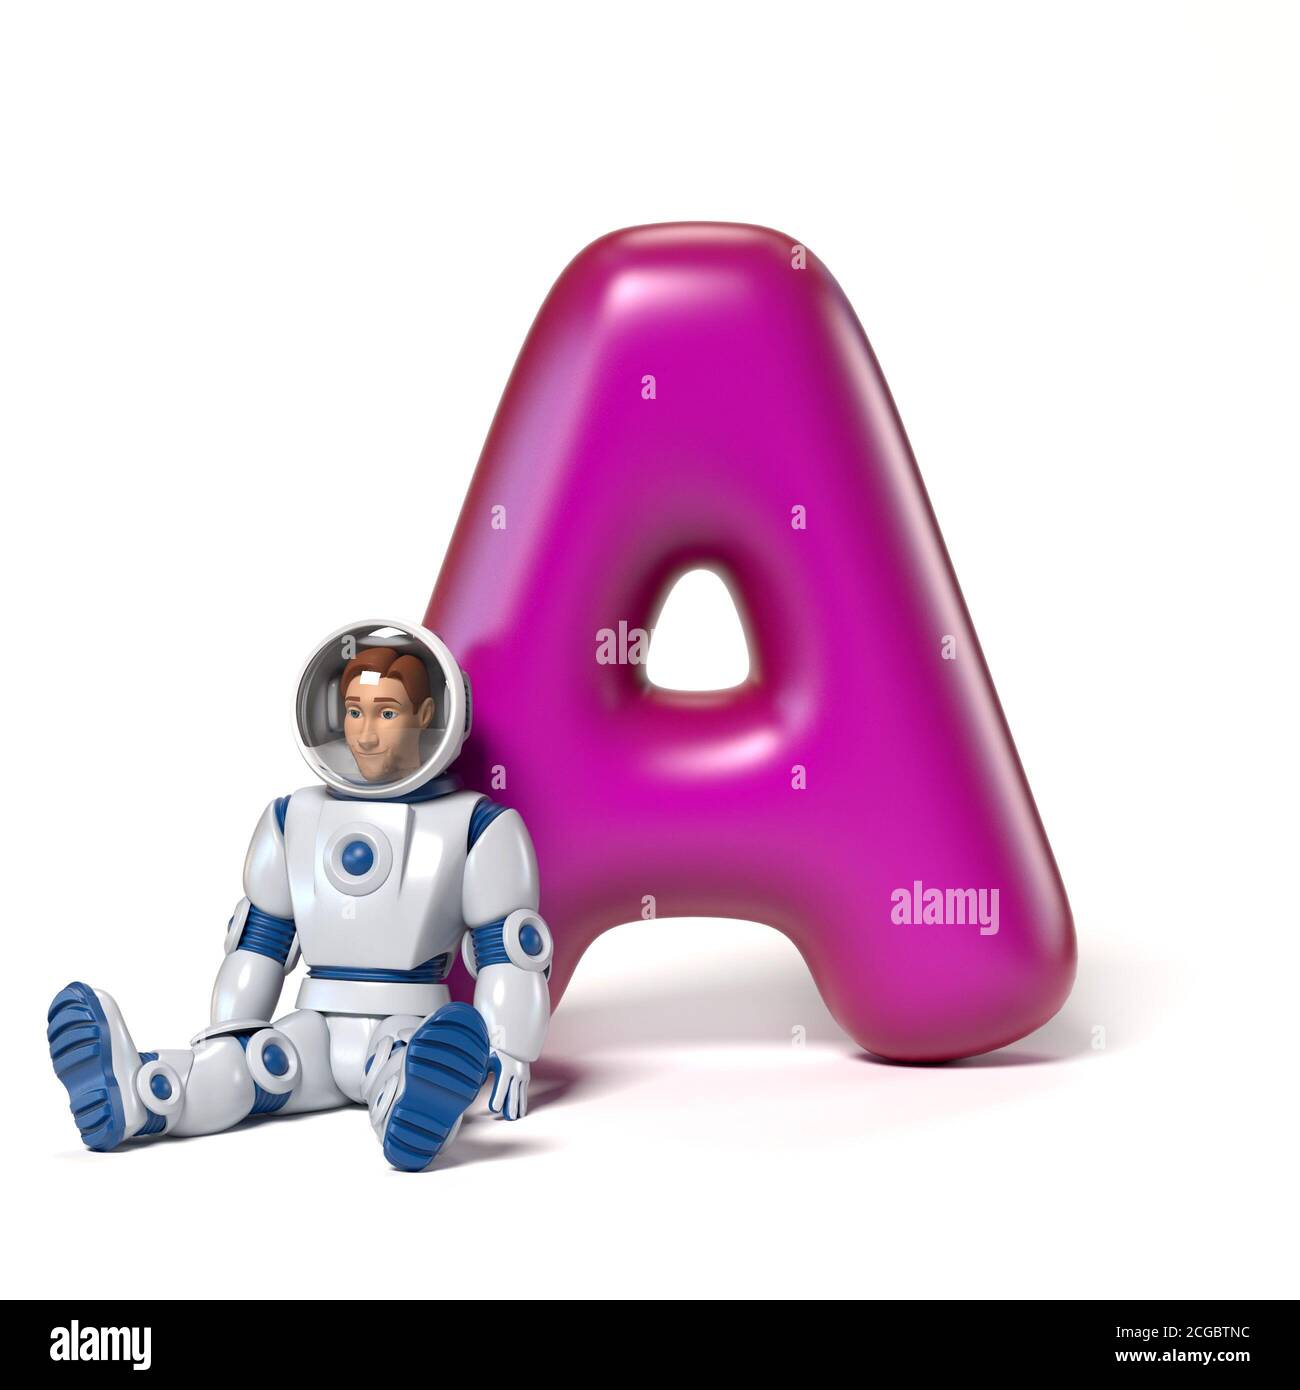 Toy font letter A 3d rendering Stock Photo